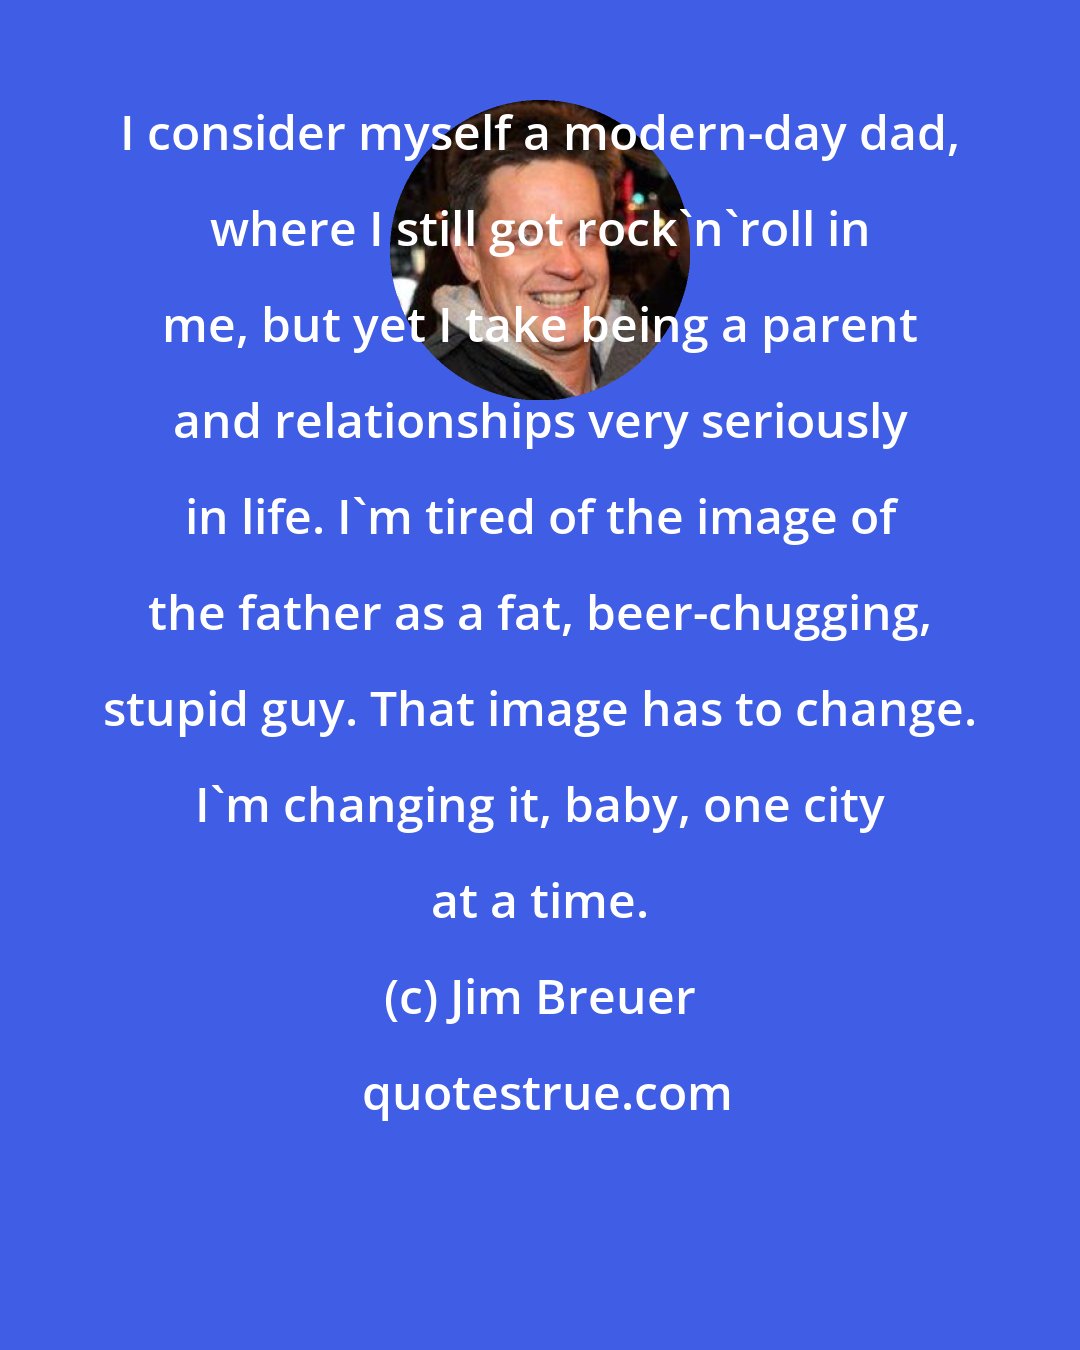 Jim Breuer: I consider myself a modern-day dad, where I still got rock'n'roll in me, but yet I take being a parent and relationships very seriously in life. I'm tired of the image of the father as a fat, beer-chugging, stupid guy. That image has to change. I'm changing it, baby, one city at a time.